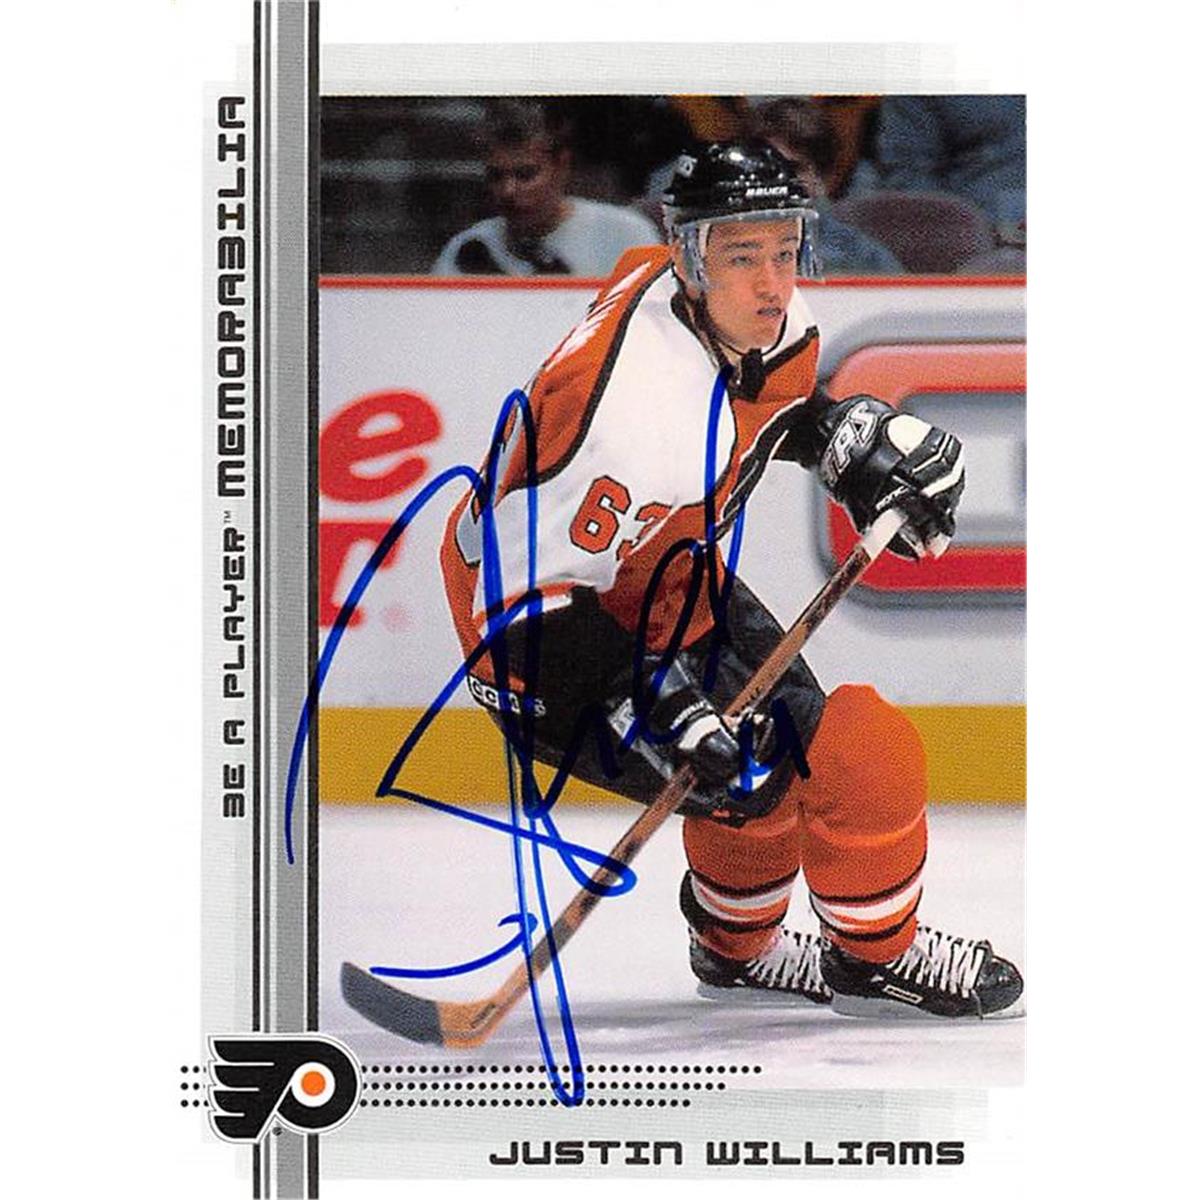 Picture of Autograph Warehouse 466133 Justin Williams Autographed Philadelphia Flyers Hockey Card 2000 BAP No. 444